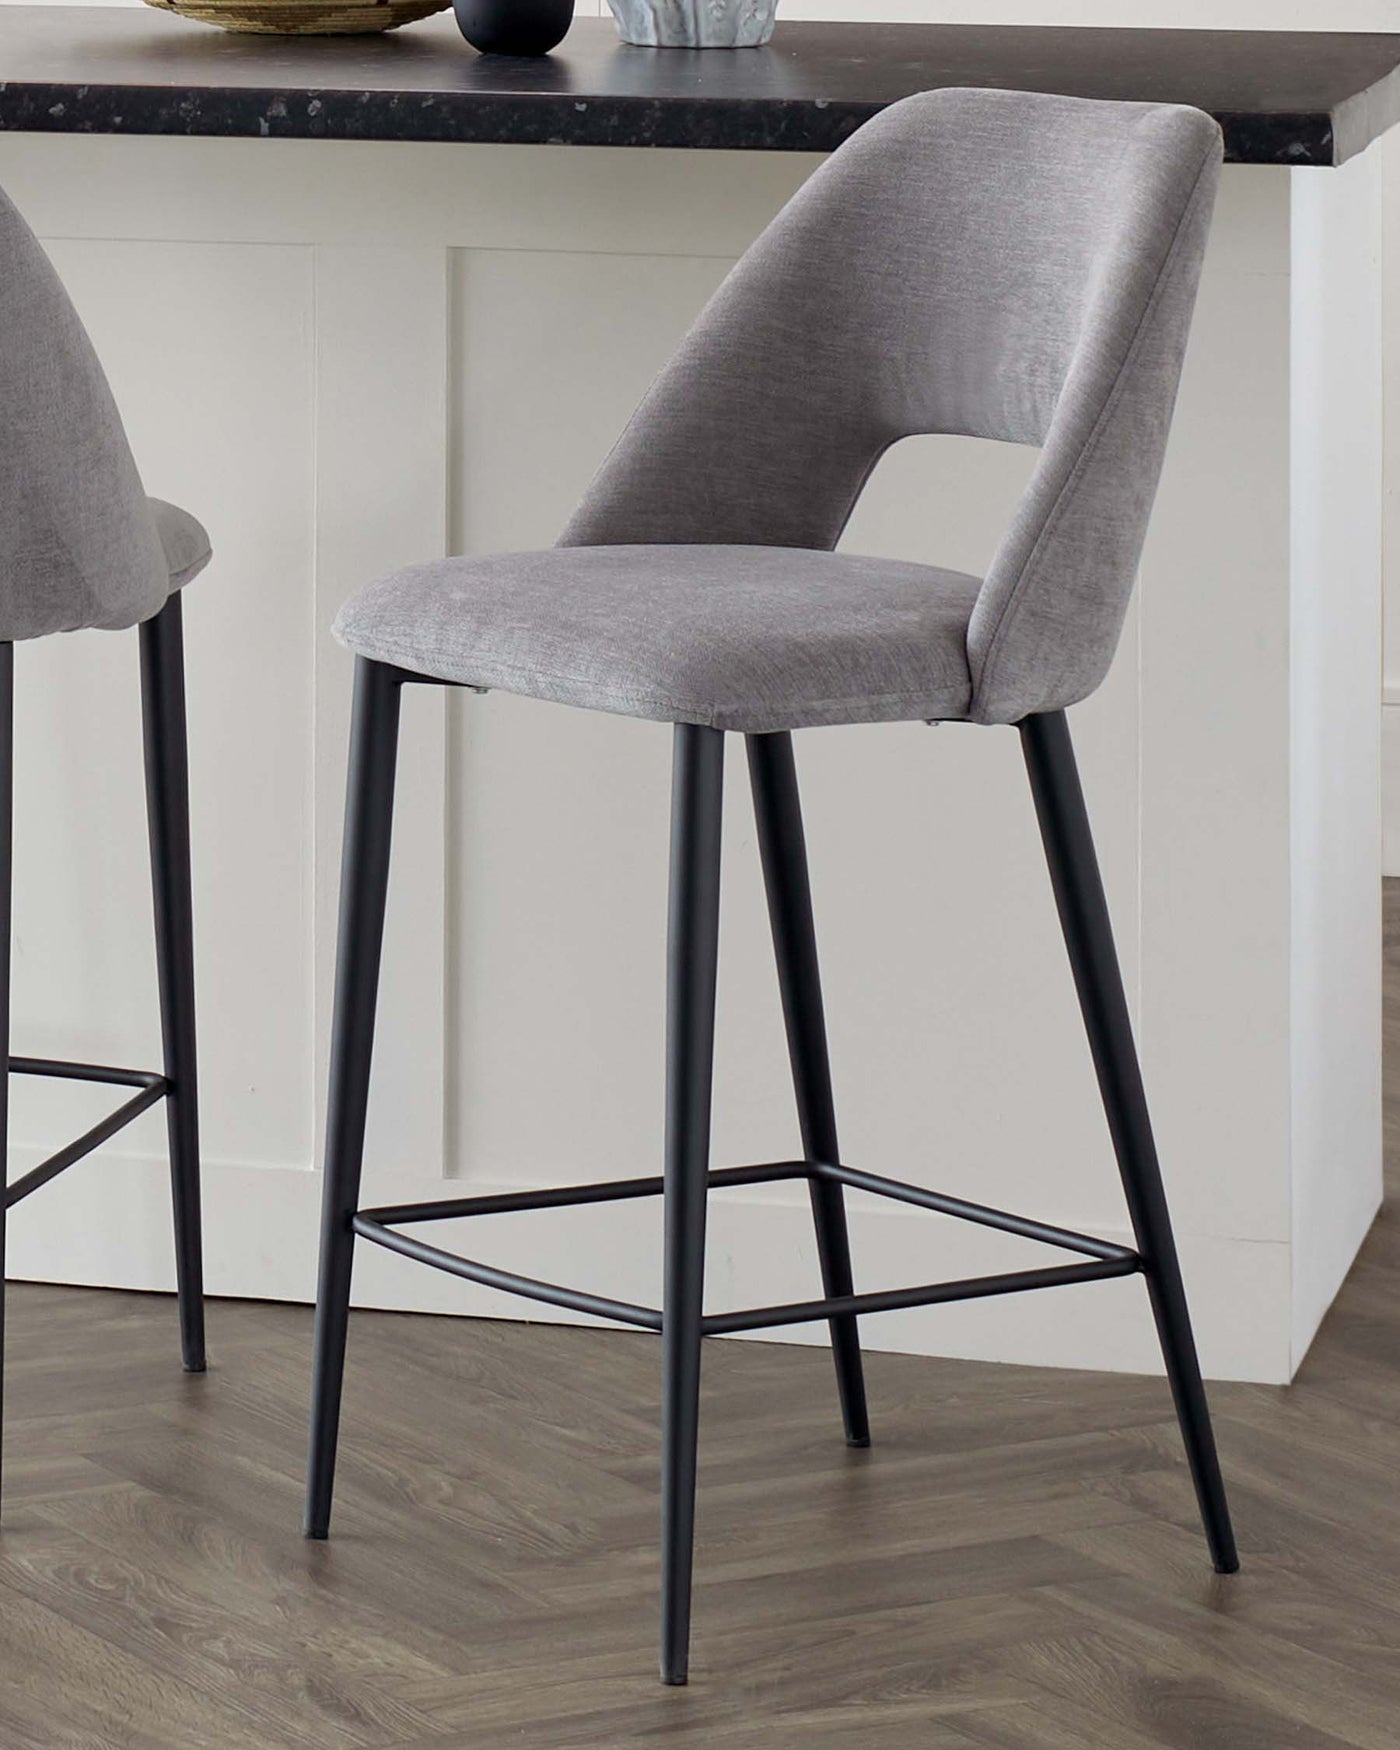 Modern bar stool with a curved back, light grey fabric upholstery, and slender black metal legs with a circular footrest. The seat is positioned against a kitchen island with a contrasting dark countertop.